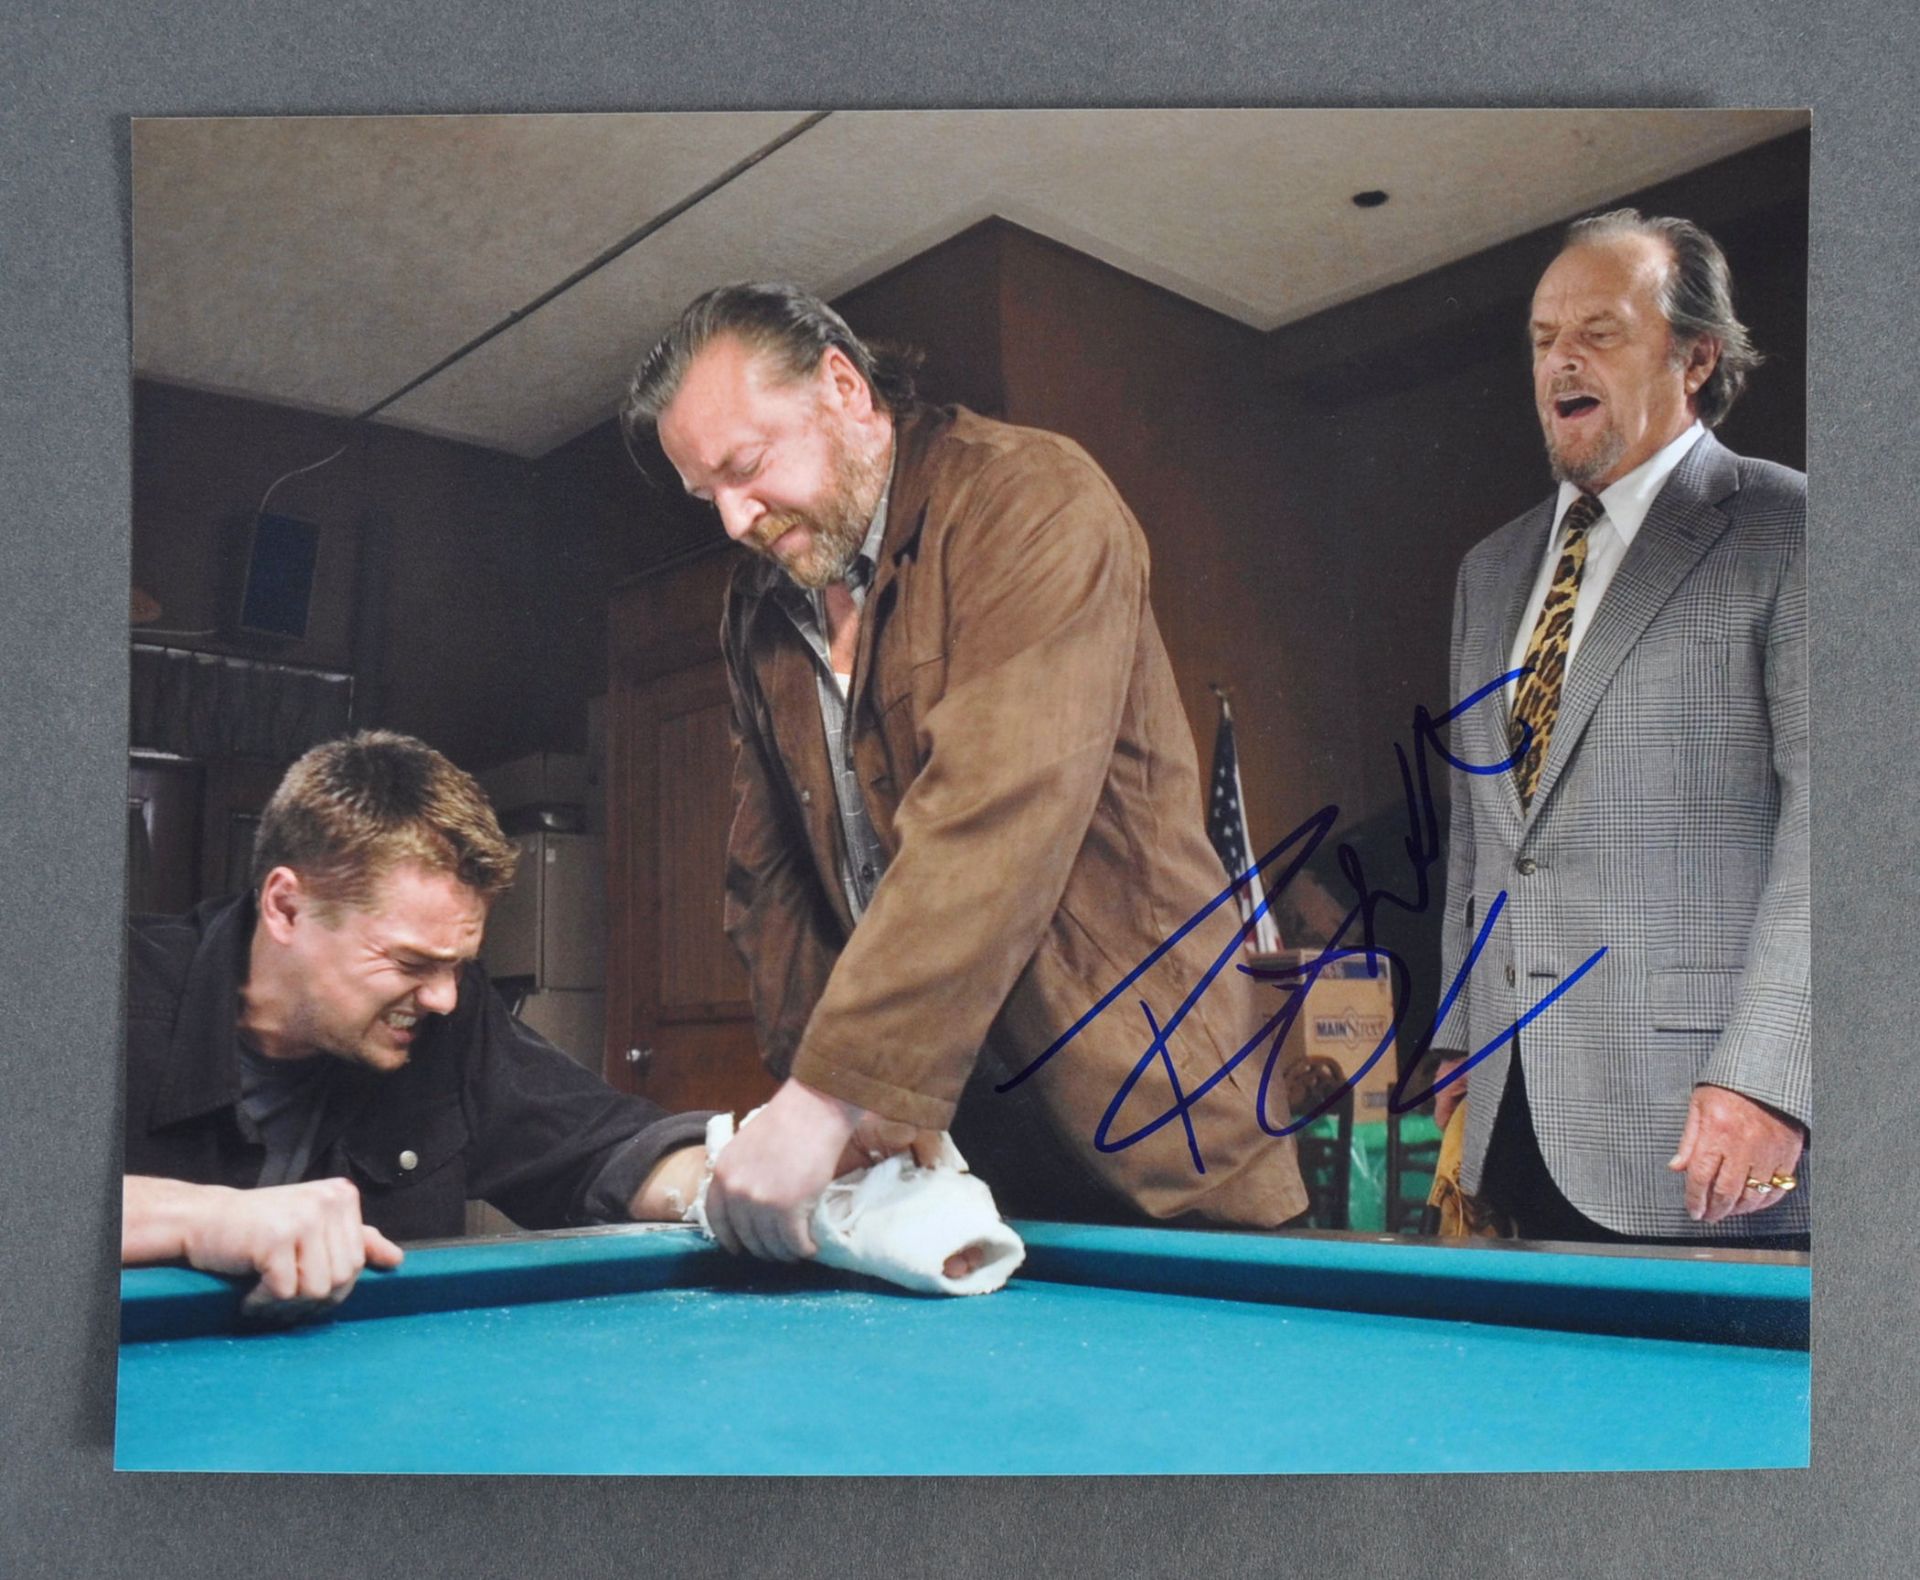 RAY WINSTONE - THE DEPARTED - AUTOGRAPHED PHOTO